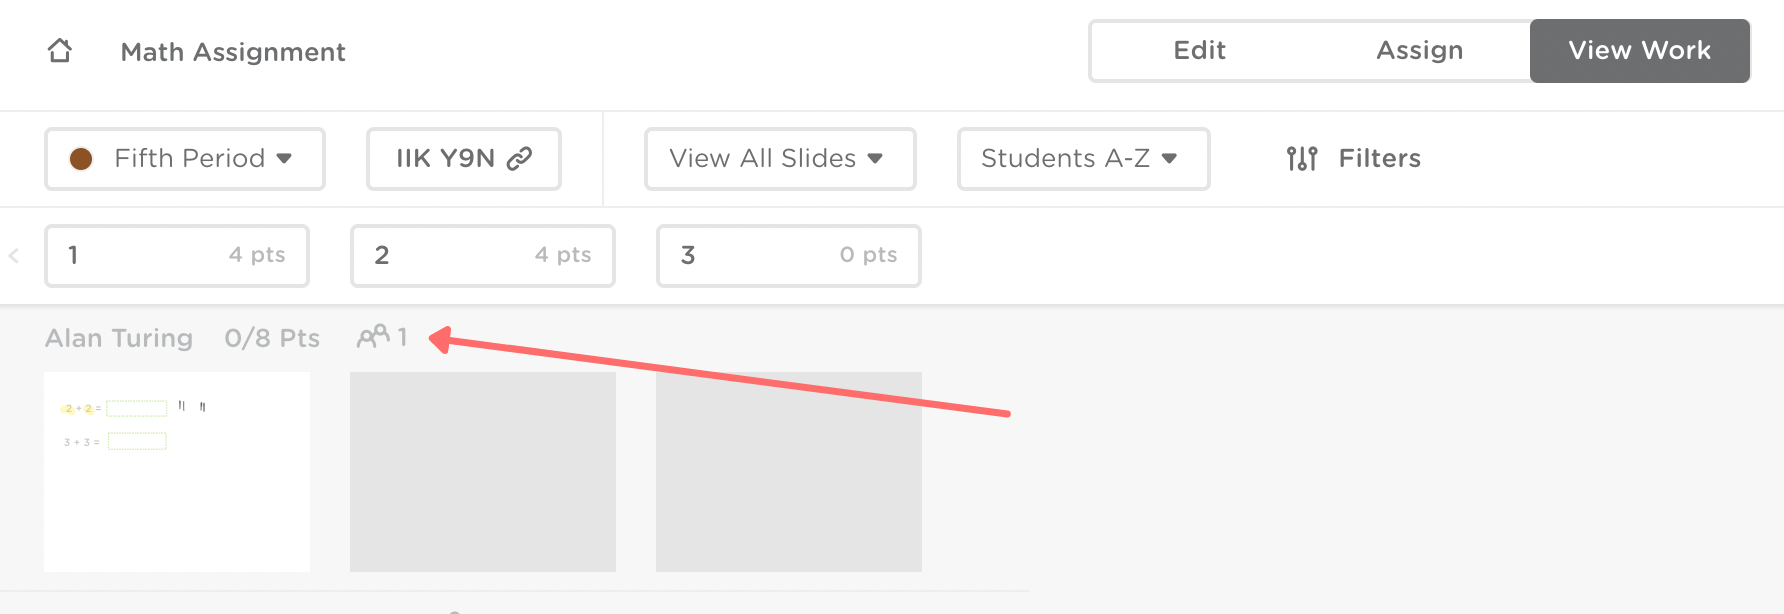 The teacher’s view of the view work tab. A red arrow points to the peer helpers icon with the number one next to it.